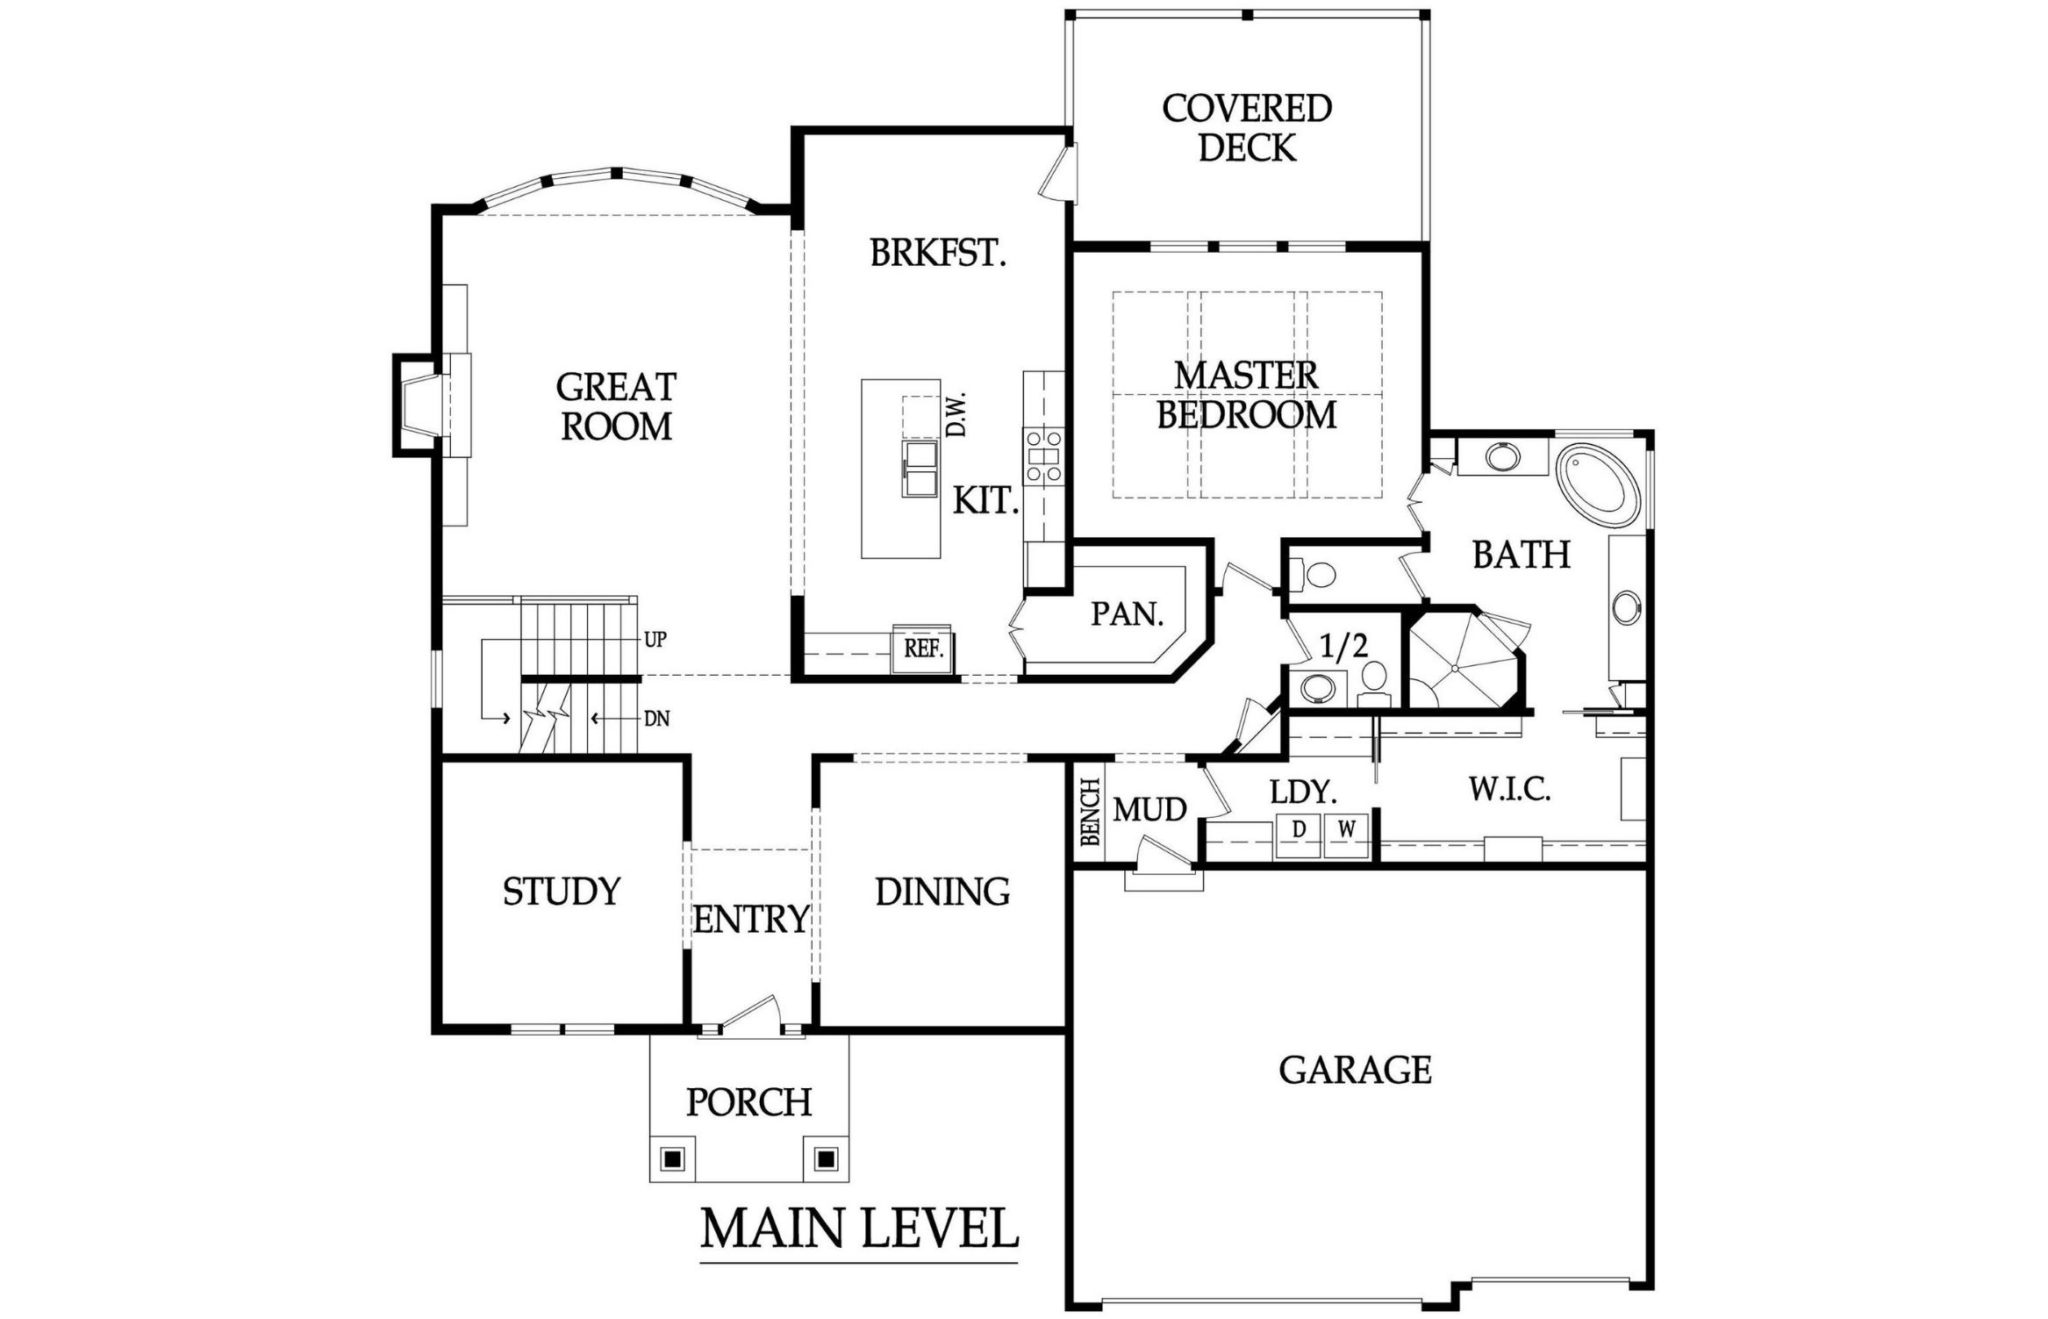 The main level of the Jefferson farmhouse floor plan includes the great room, kitchen, breakfast nook, study, dining room, laundry room, master suite, and three car garage.